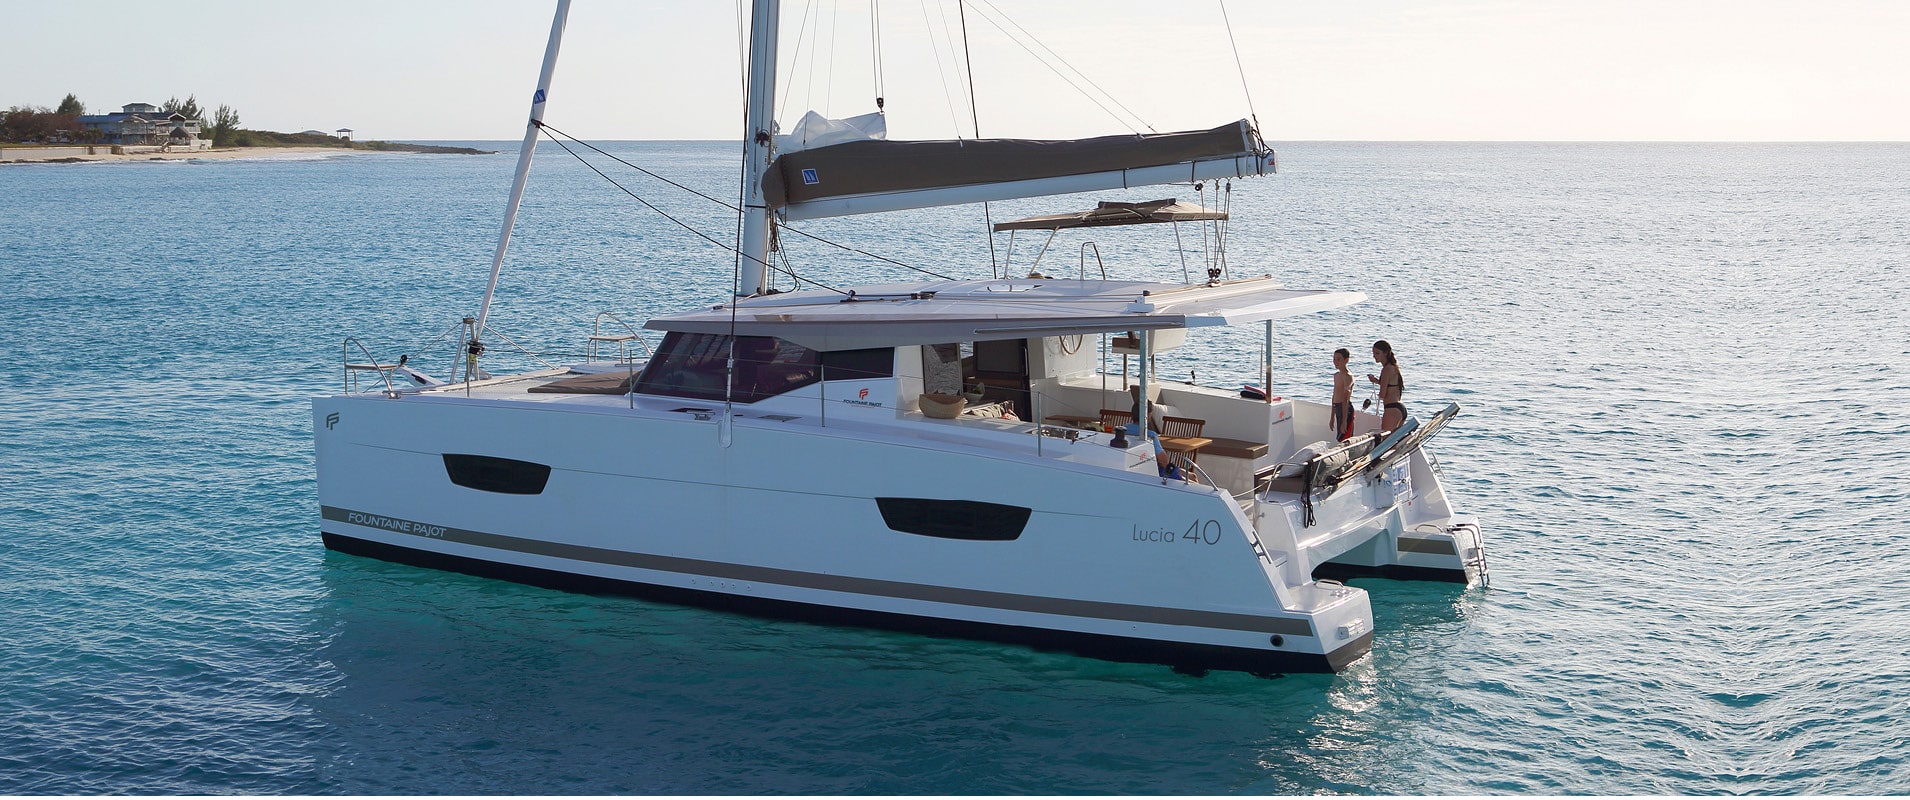 Fountaine Pajot Lucia 40 - Catamaran Charter Rhodes & Boat hire in Greece Dodecanese Rhodes Rhodes Marina 1